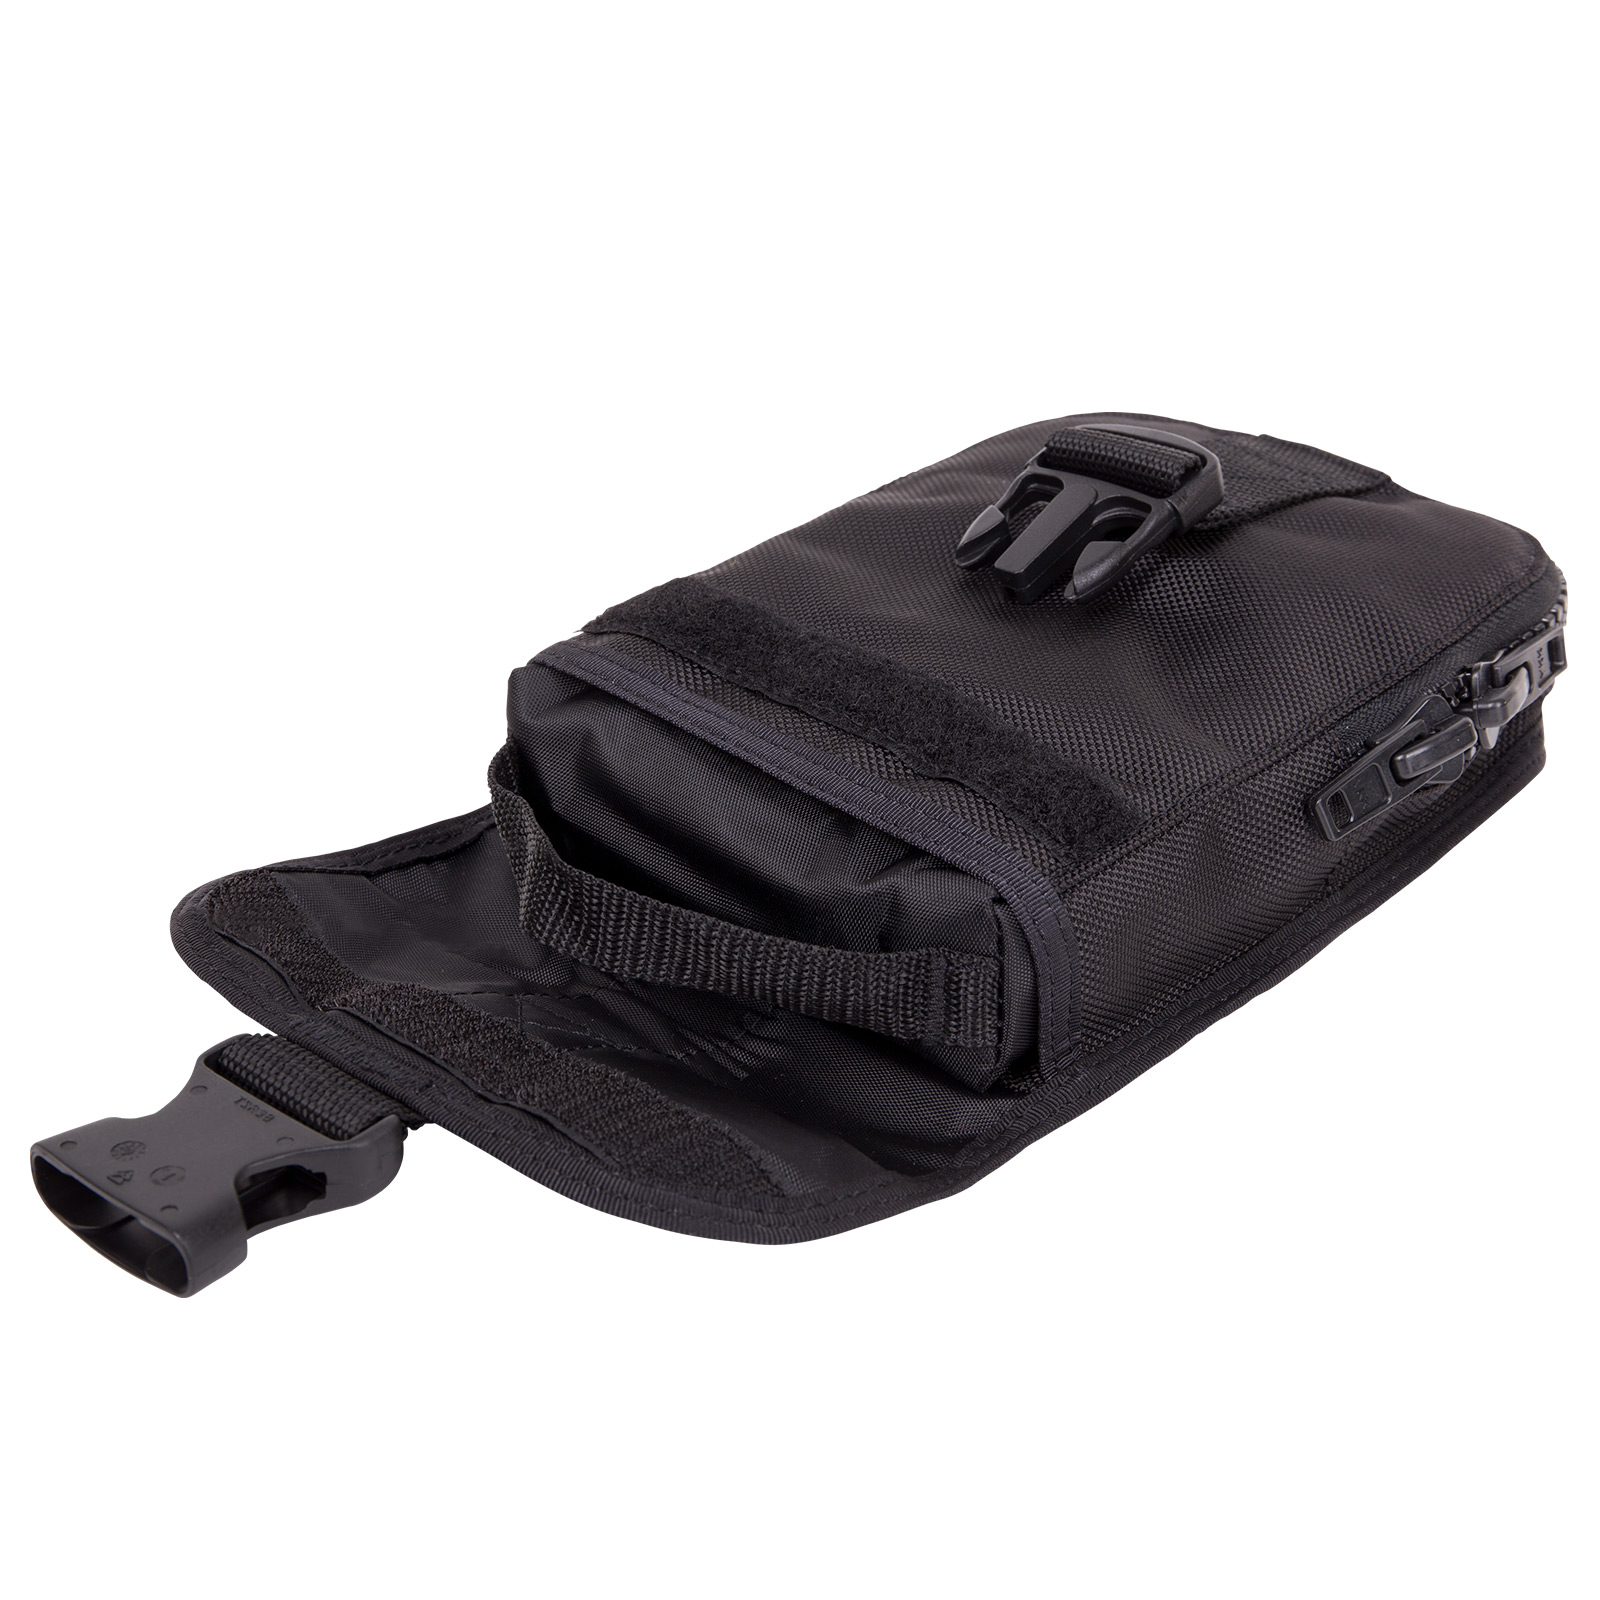 IST Diving System :: TECHNICAL :: TECH DIVING ACCESSORIES :: Tech BCD ...